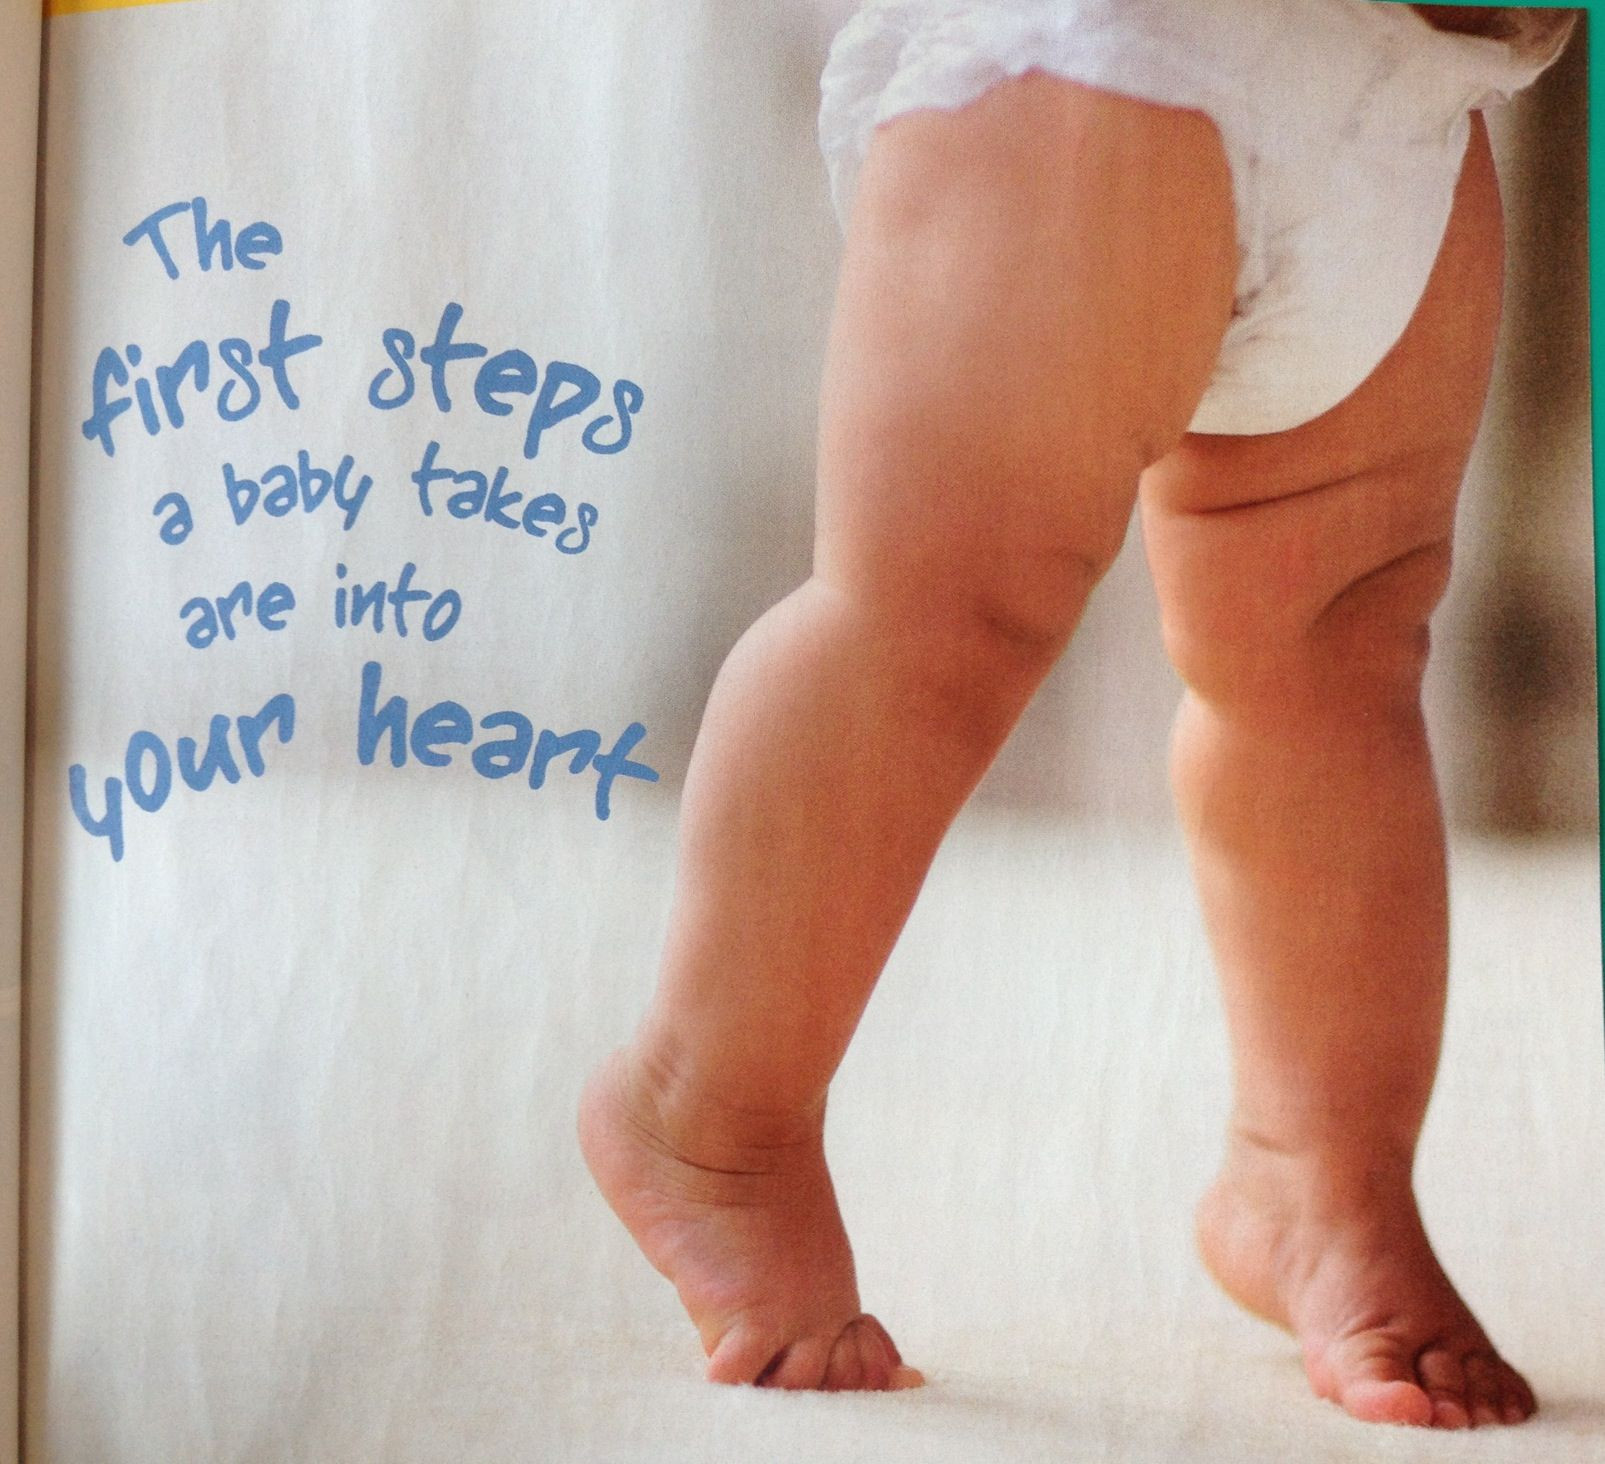 Baby First Steps Quotes
 A baby s first steps are into your heart